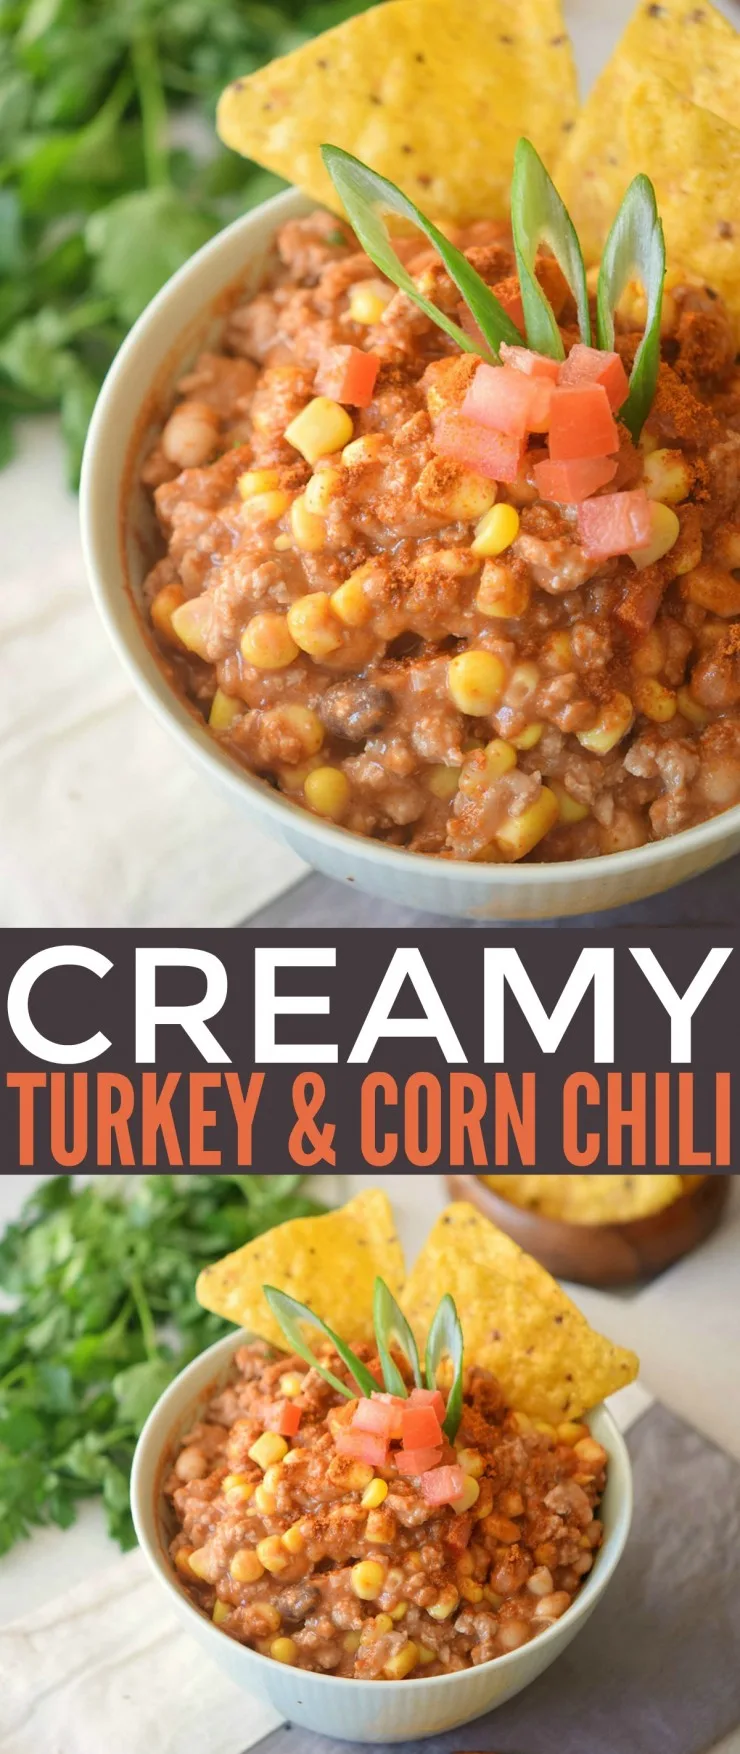 This Creamy Turkey & Corn Chili is a delicious twist on the classic dish. Turkey chili paired with a creamy sauce, corn and beans makes for a flavourful family meal.